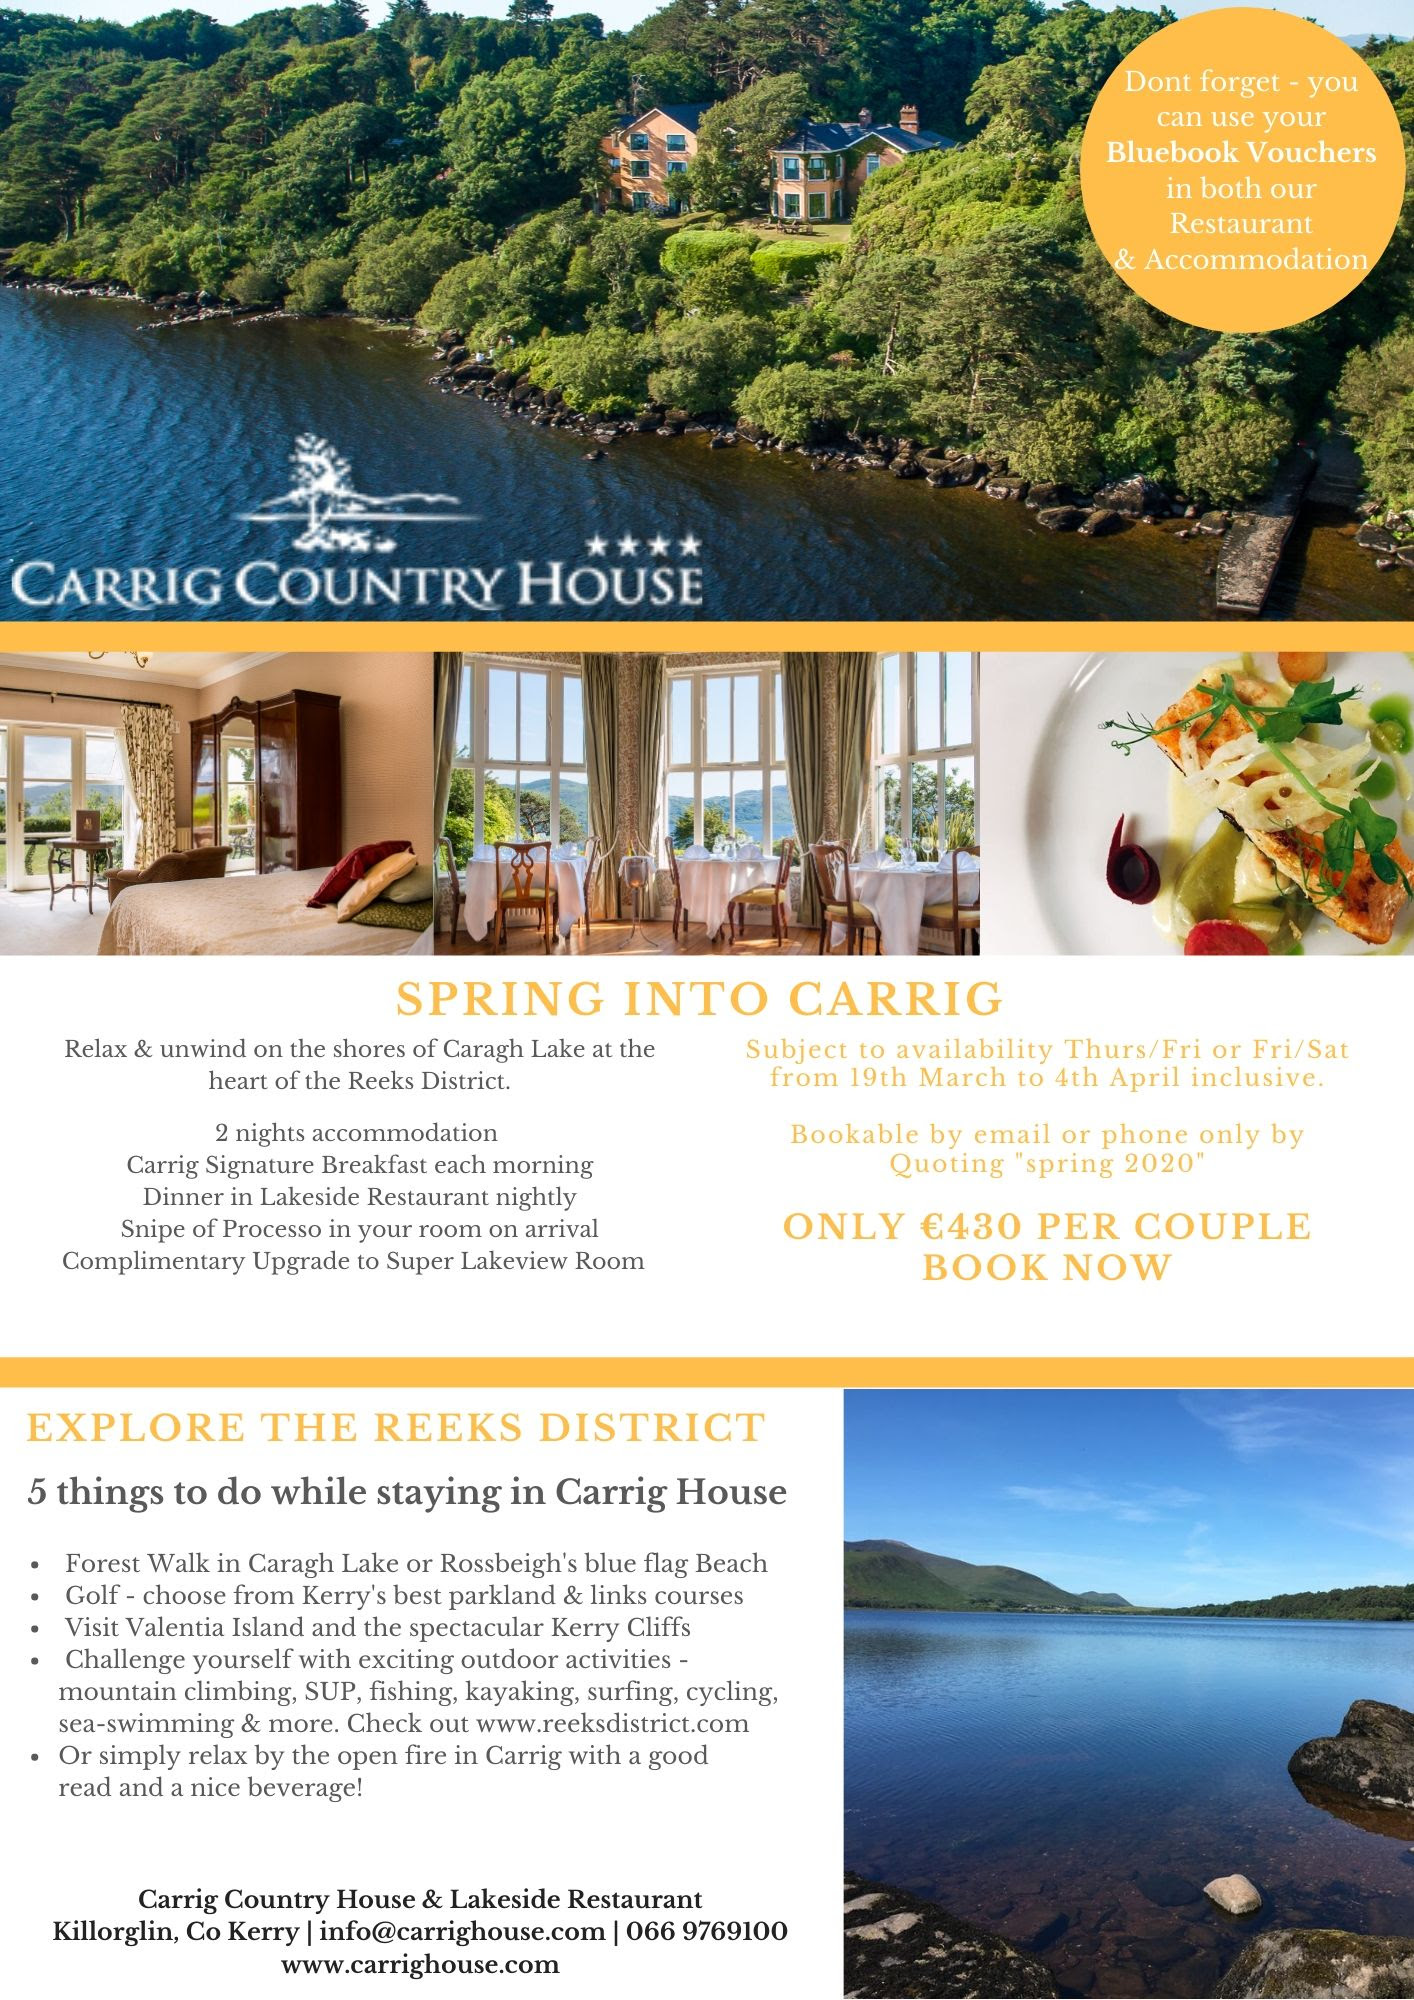 Carrig Country House & Lakeside Restaurant - Spring Into Carrig!